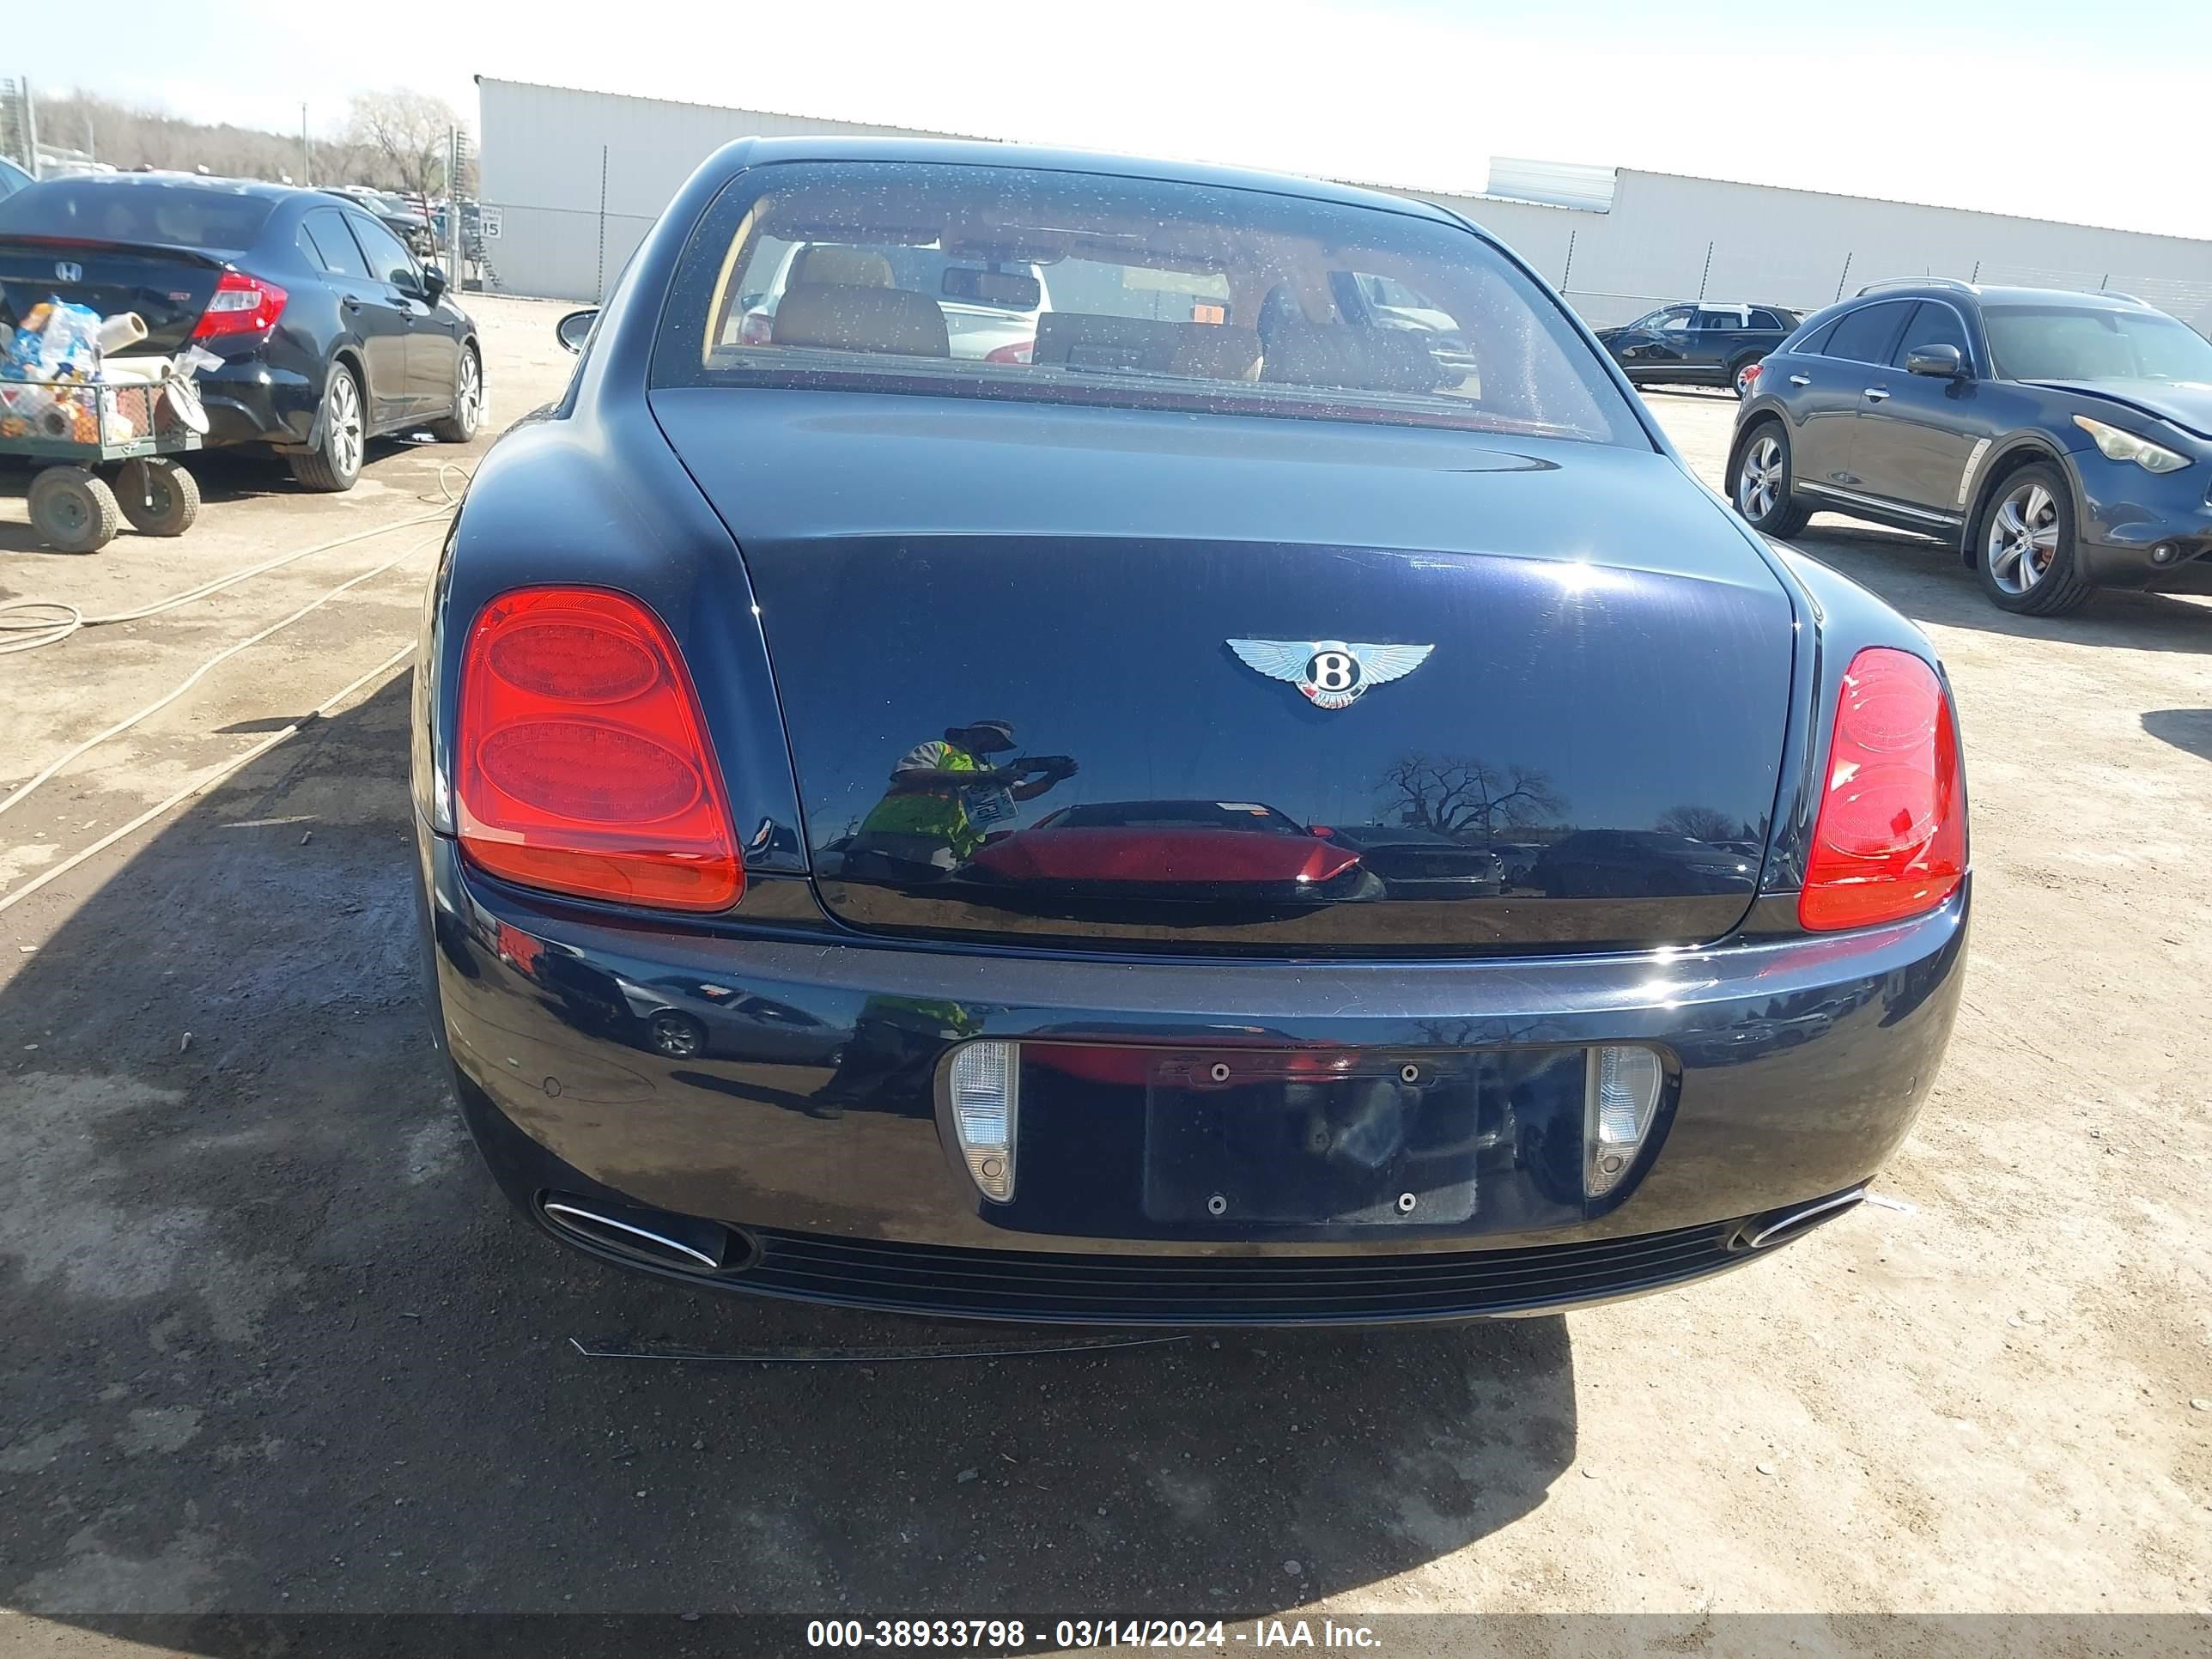 Photo 15 VIN: SCBBR53W46C034805 - BENTLEY CONTINENTAL FLYING SPUR 